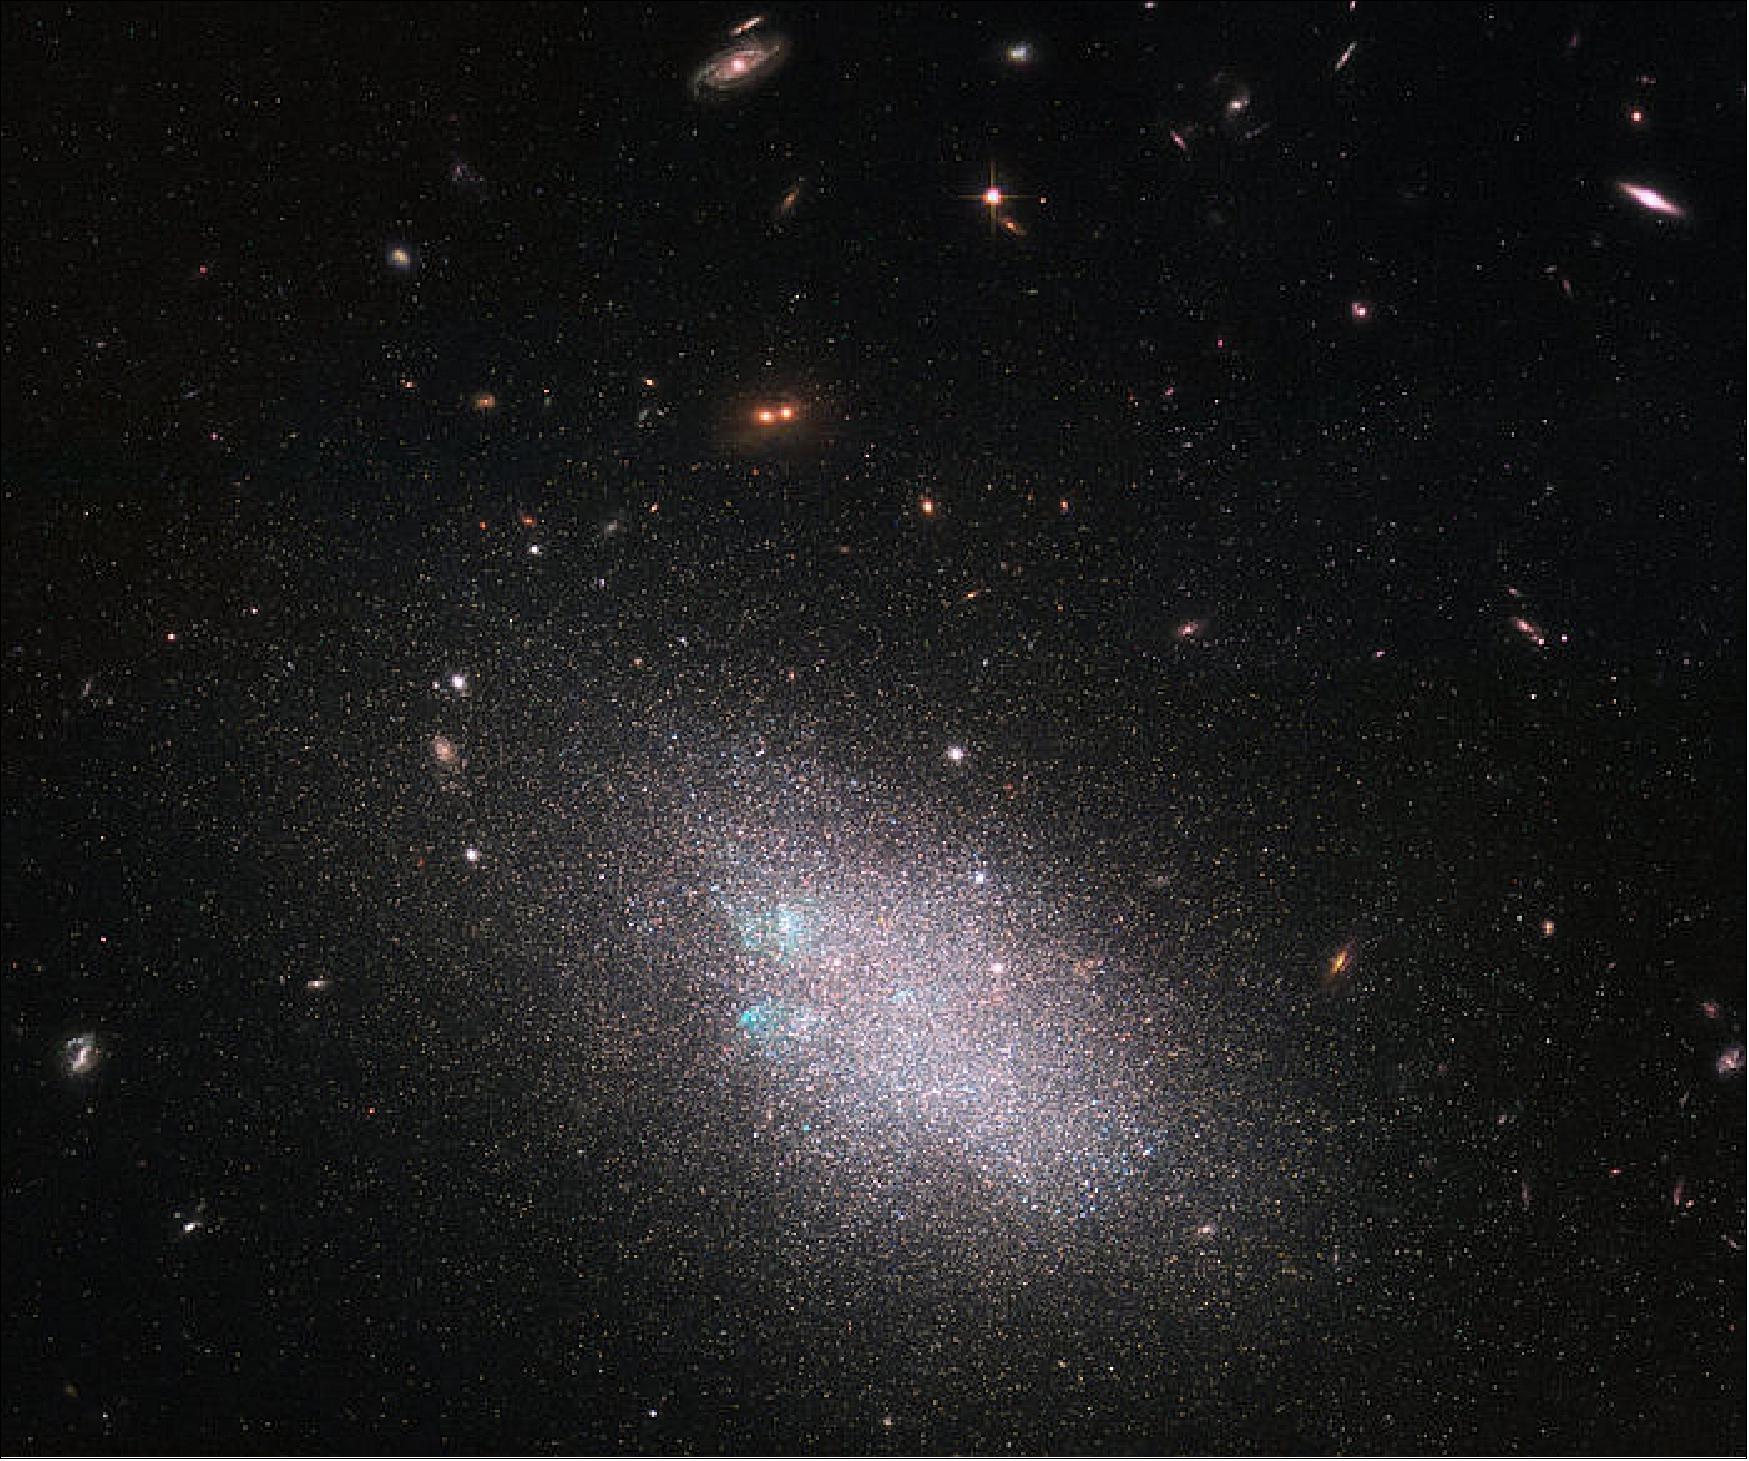 Figure 29: These data were gathered under the NASA/ESA Hubble Space Telescope’s LEGUS (Legacy ExtraGalactic UV Survey) Program, the sharpest and most comprehensive ultraviolet survey of star-forming galaxies in the nearby Universe (image credit: ESA/Hubble & NASA; the LEGUS team, B. Tully, D. Calzetti Acknowledgement(s): Judy Schmidt (Geckzilla); CC BY 4.0)